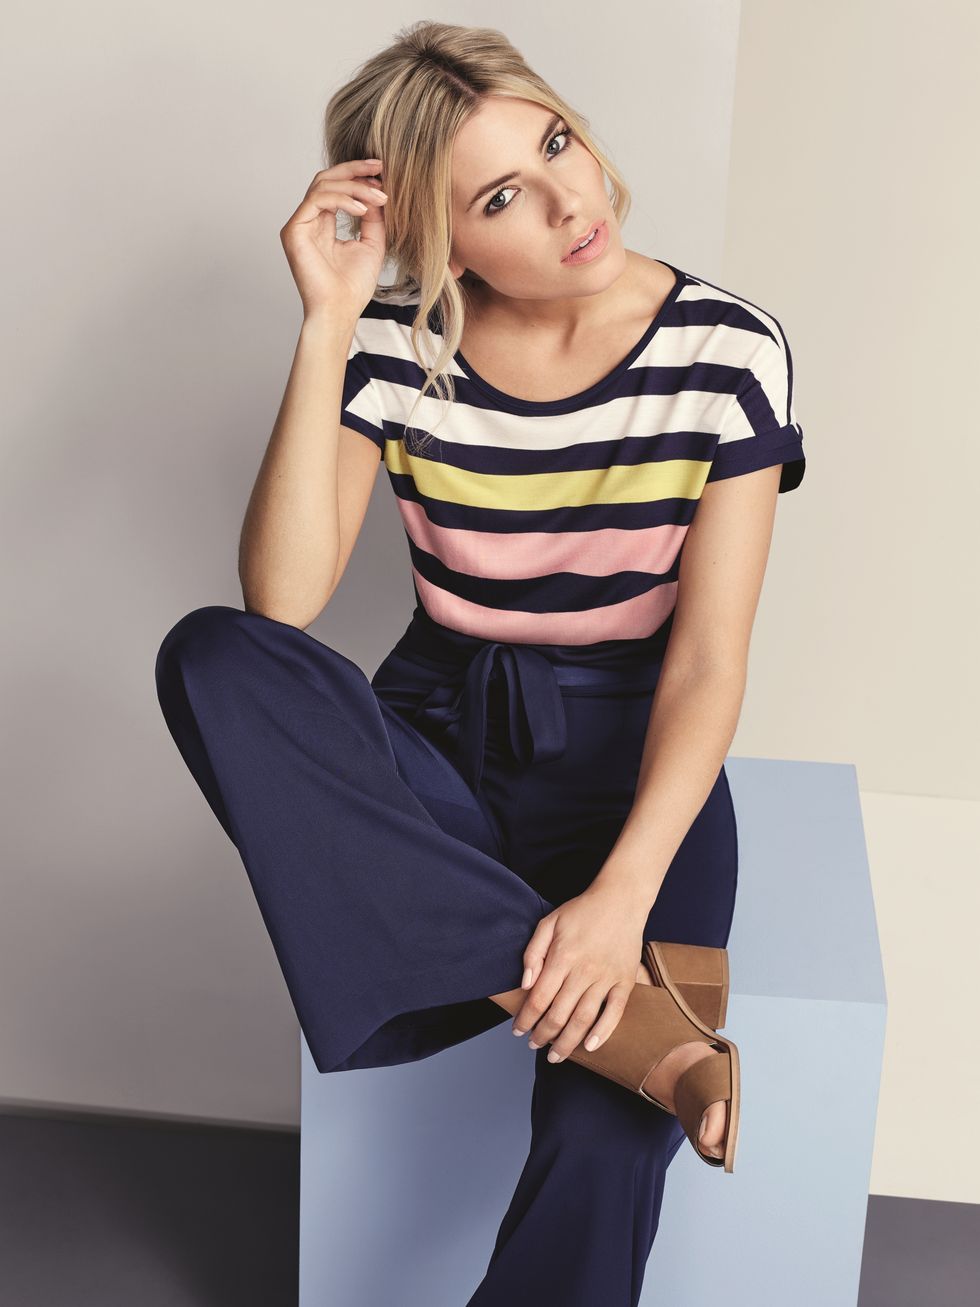 Mollie King's SS15 Oasis edit